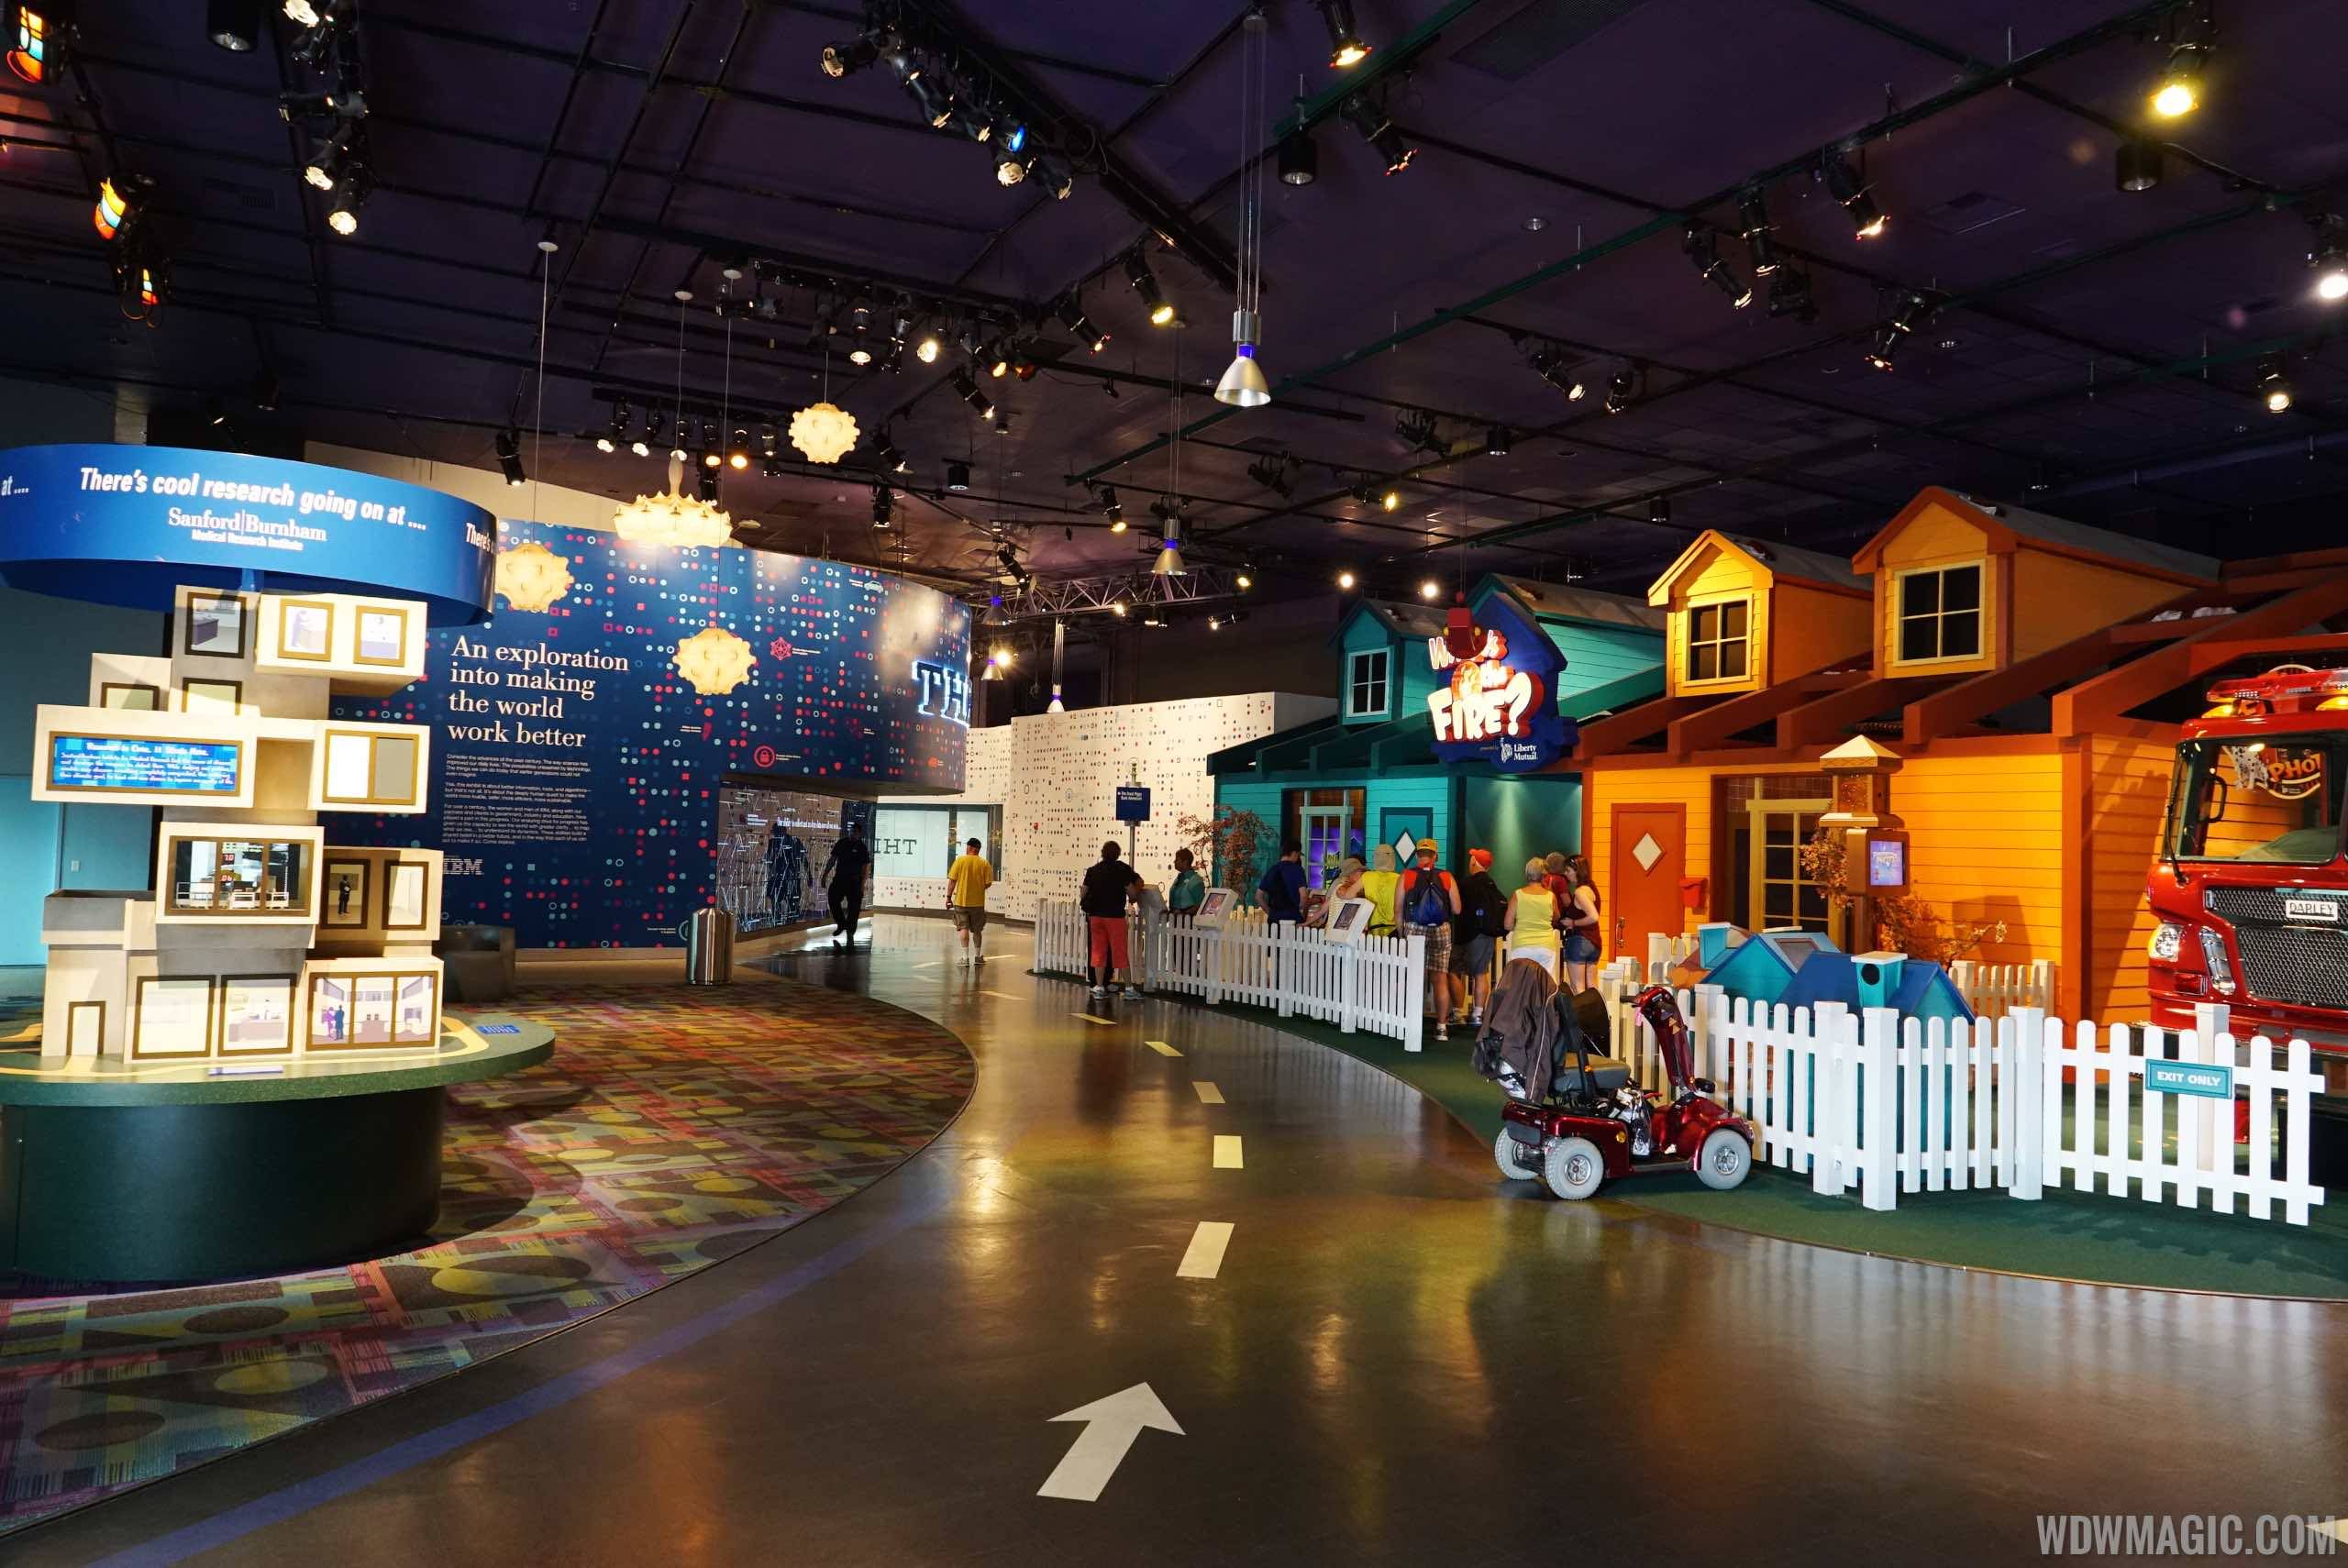 The Great Piggy Bank Adventure Exhibit to open this Spring at Innoventions